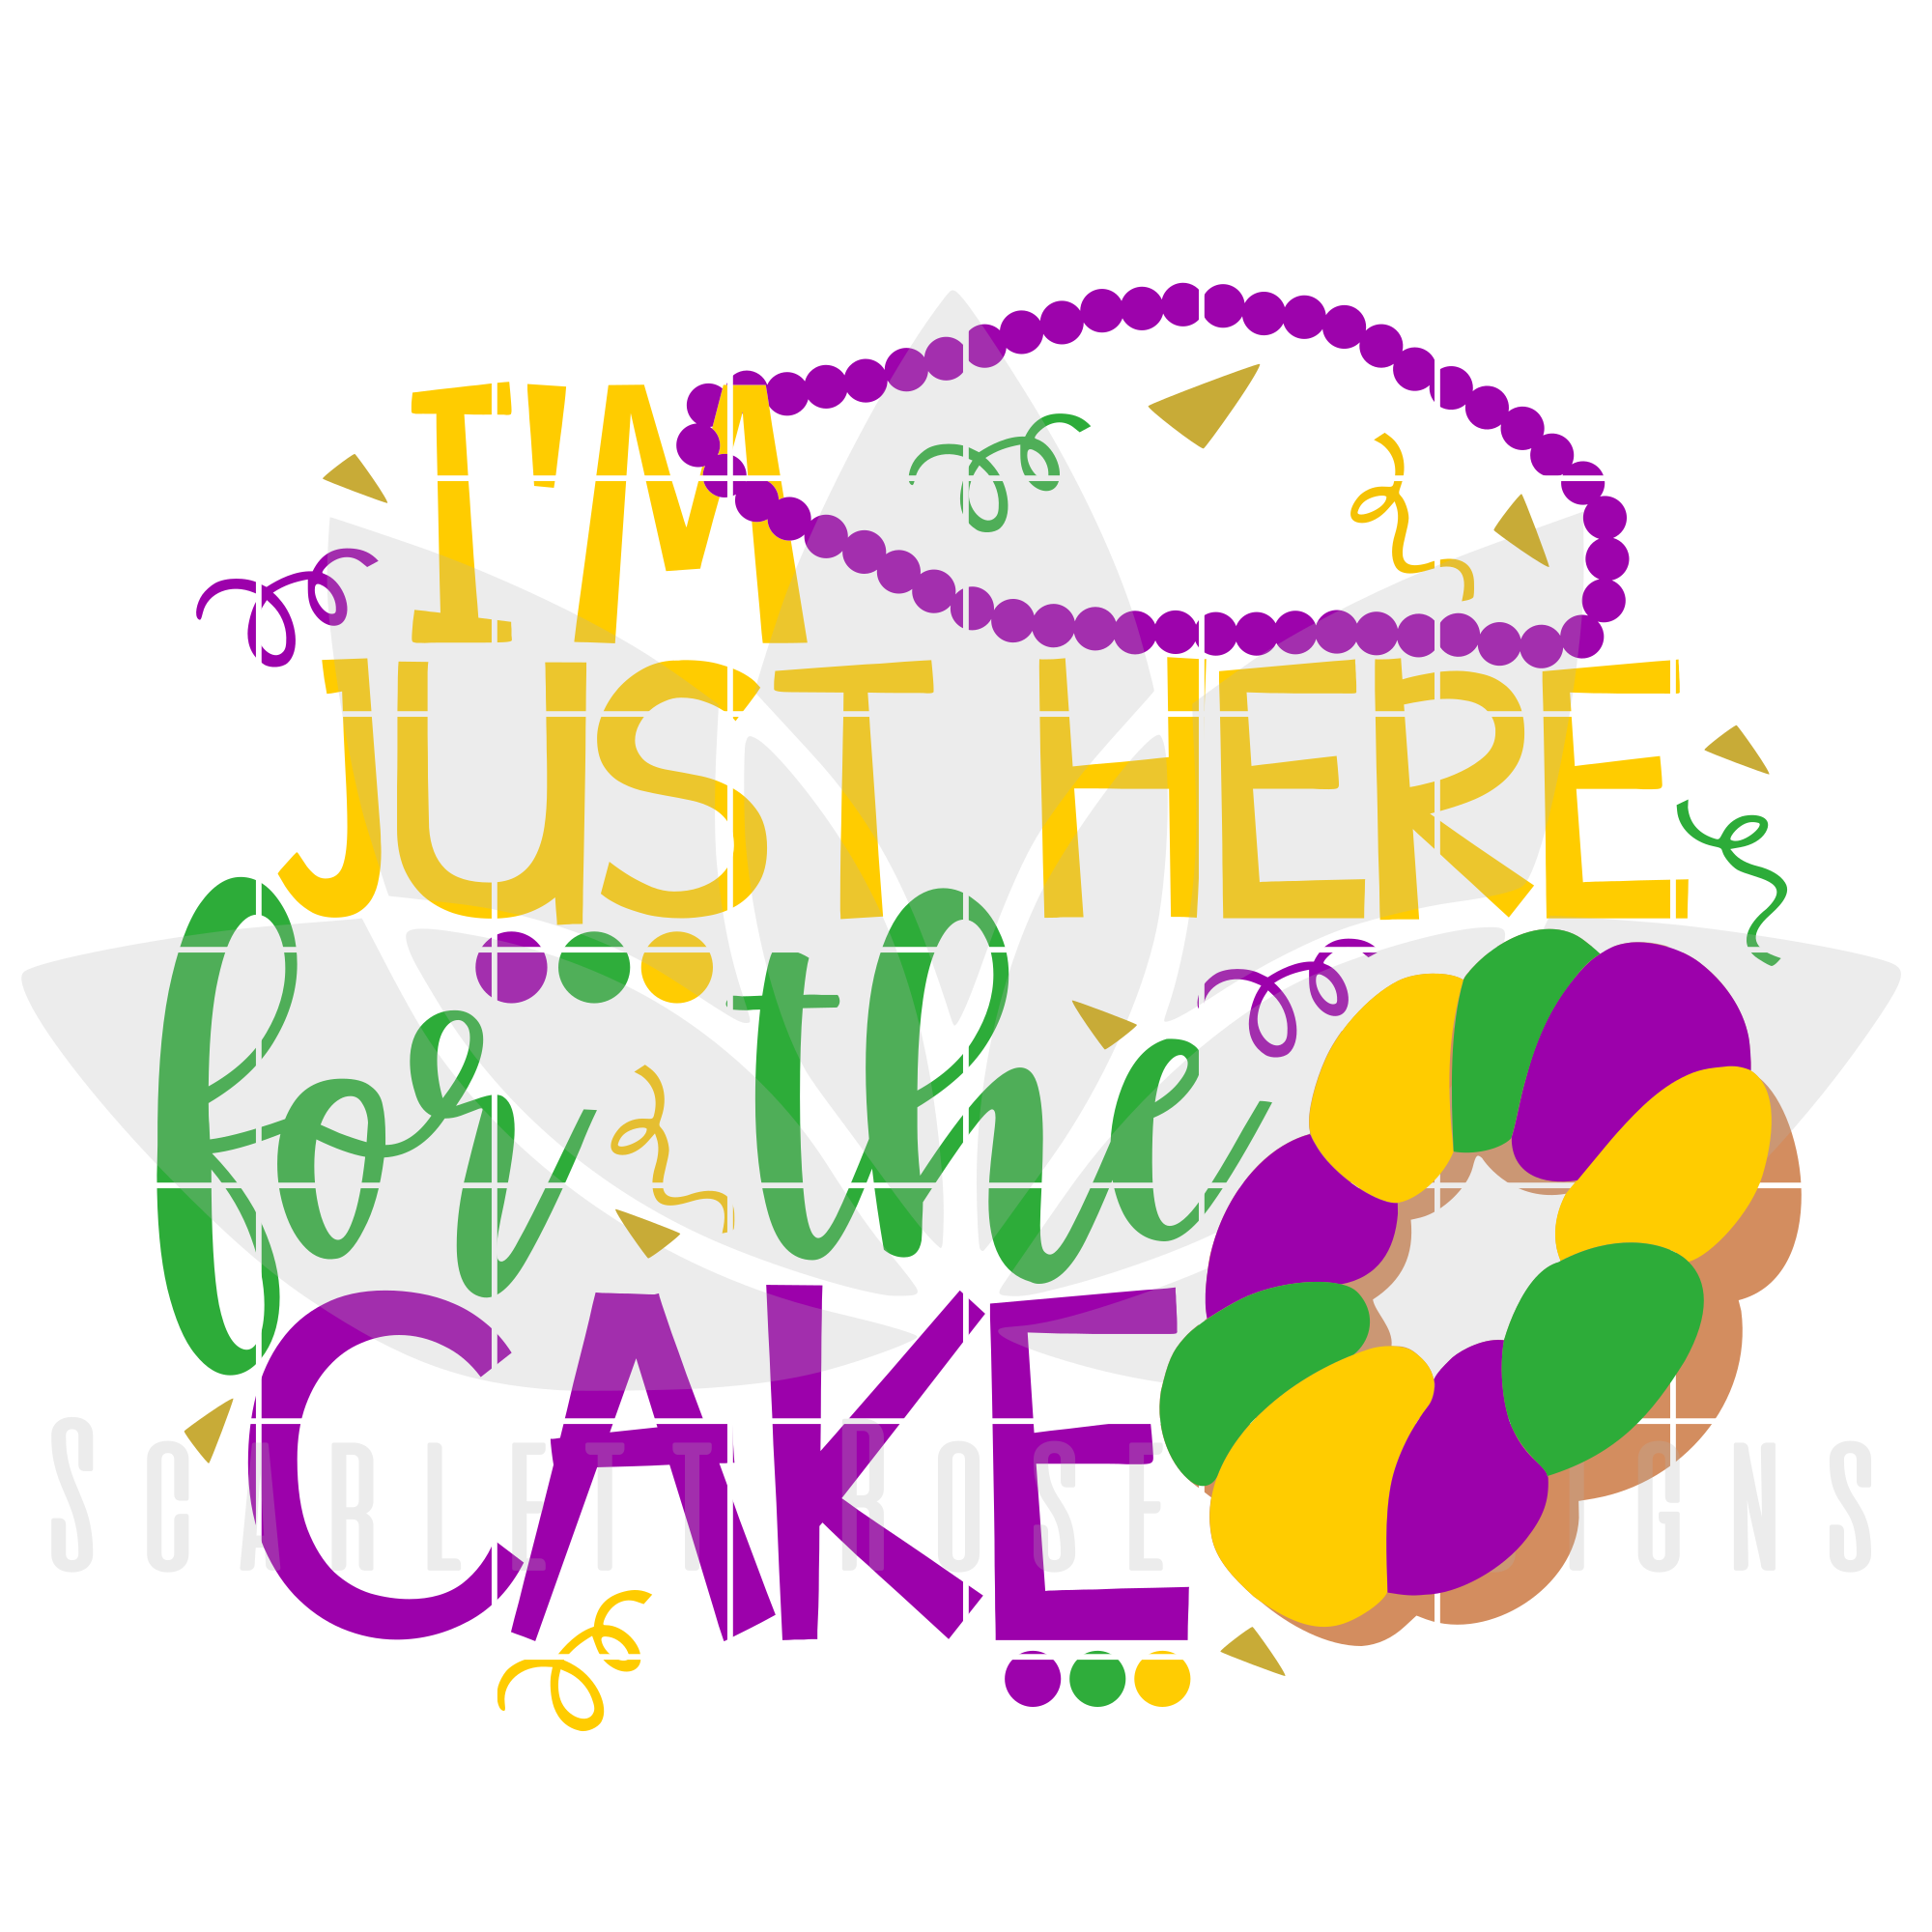 Download Clip Art King Cake Mardi Gras Design Digital Cut File And Clipart Instant Download Svg Dxf Eps 300 Dpi Jpg Png I M Just Here For The Cake Art Collectibles